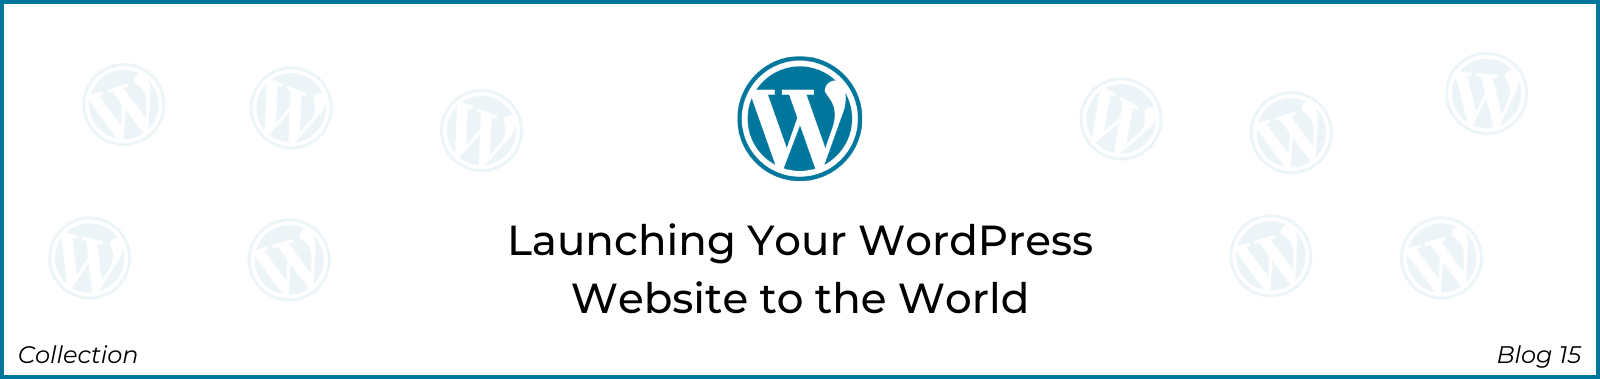 Launching Your WordPress Website to the World